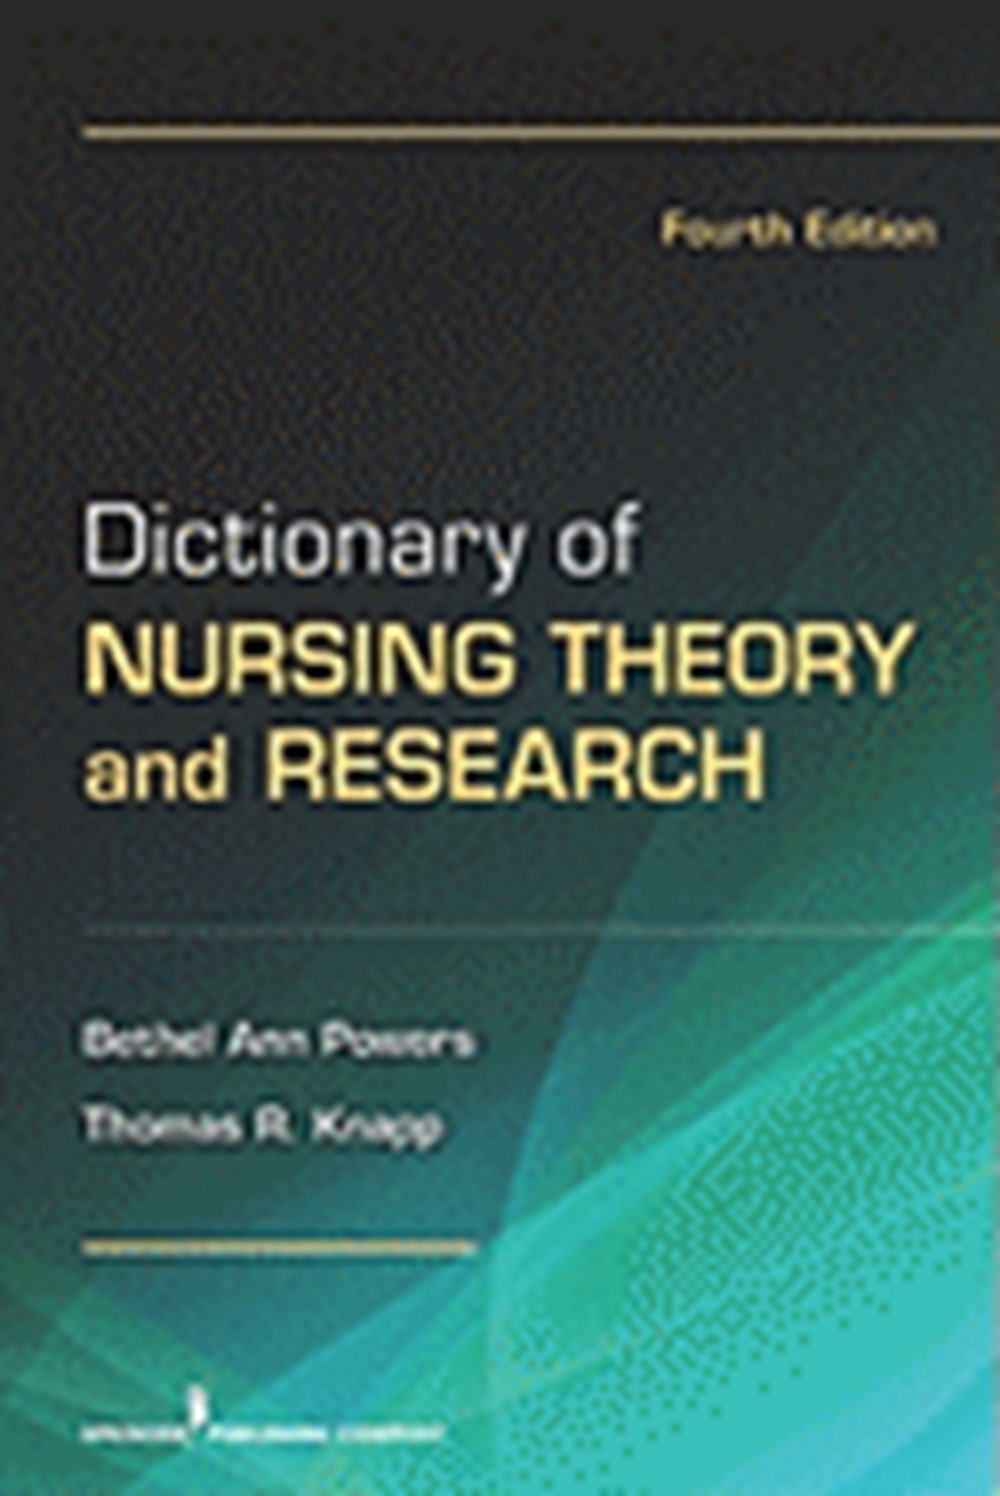 Dictionary of Nursing Theory and Research Fourth Edition